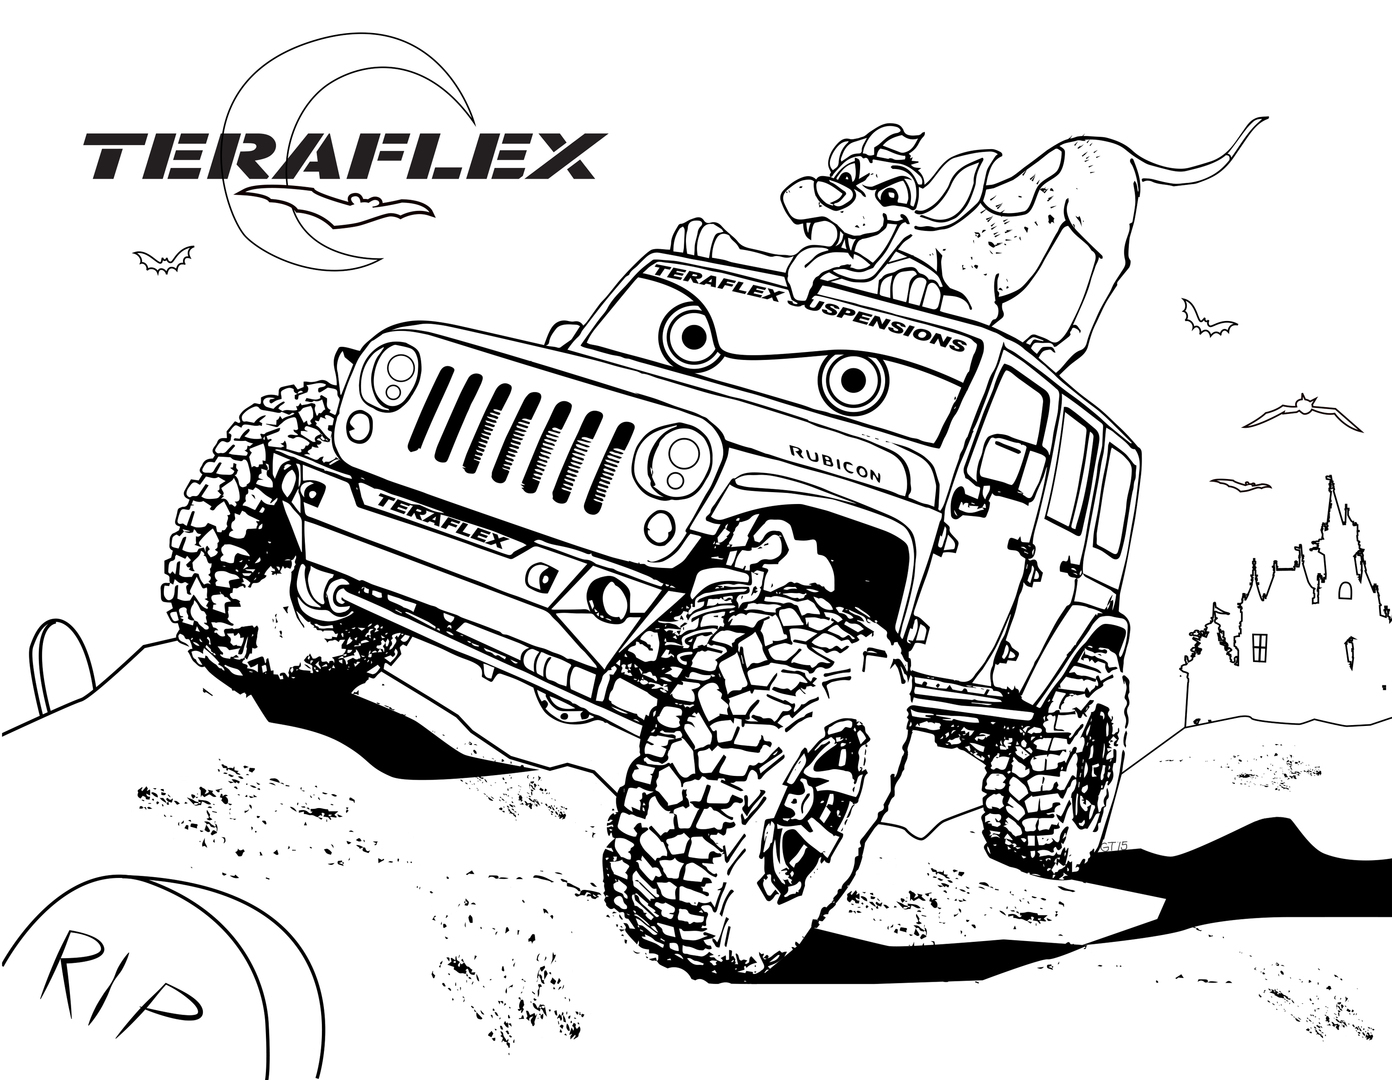 Road Trip Coloring Pages Gallery Teraflex Jeep Coloring Pages Teraflex